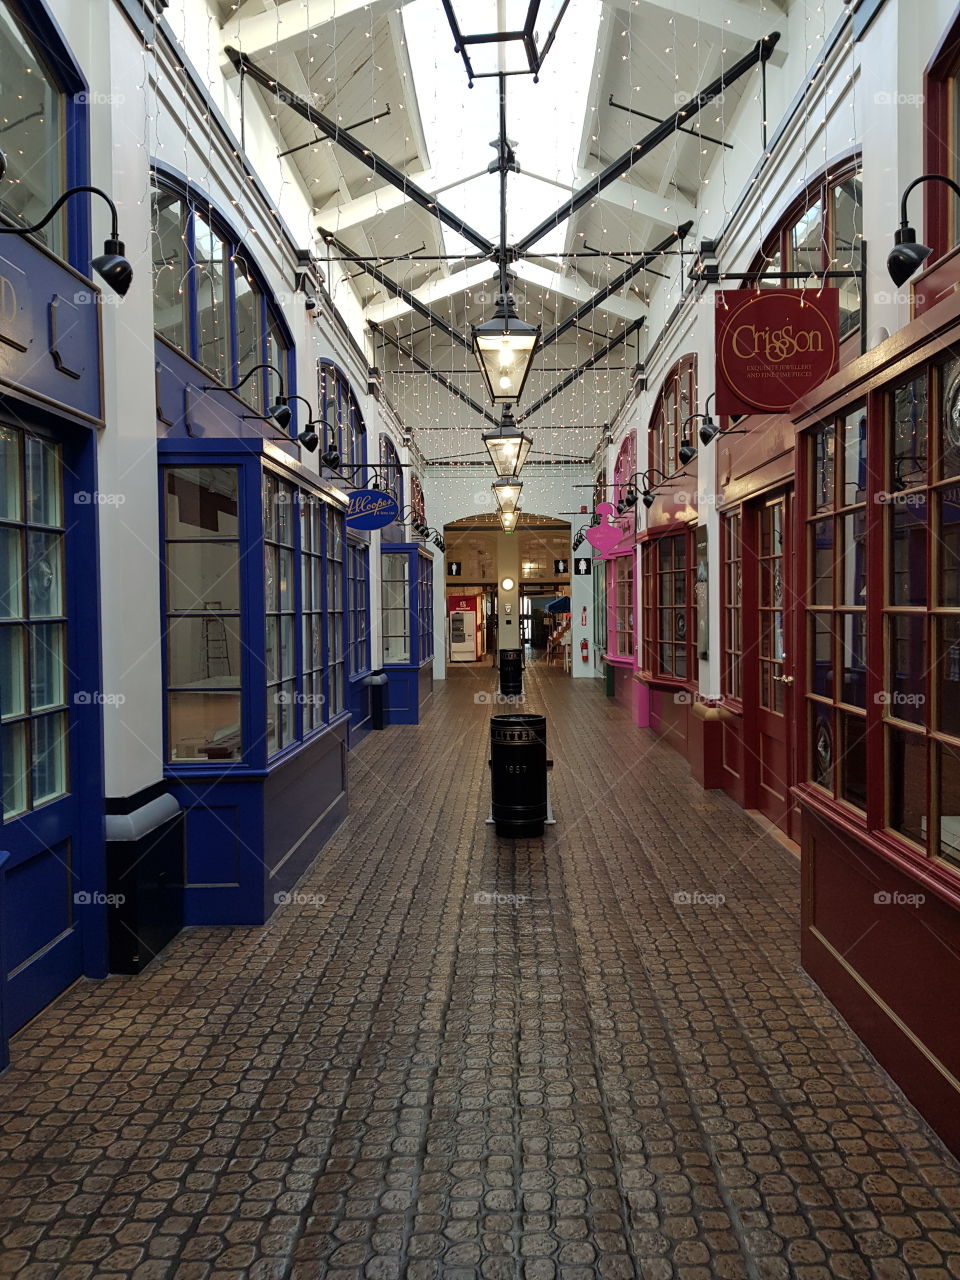 Washington Mall in Dockyard, Bermuda. Old mall with small shops. Feel the history as you walk through.